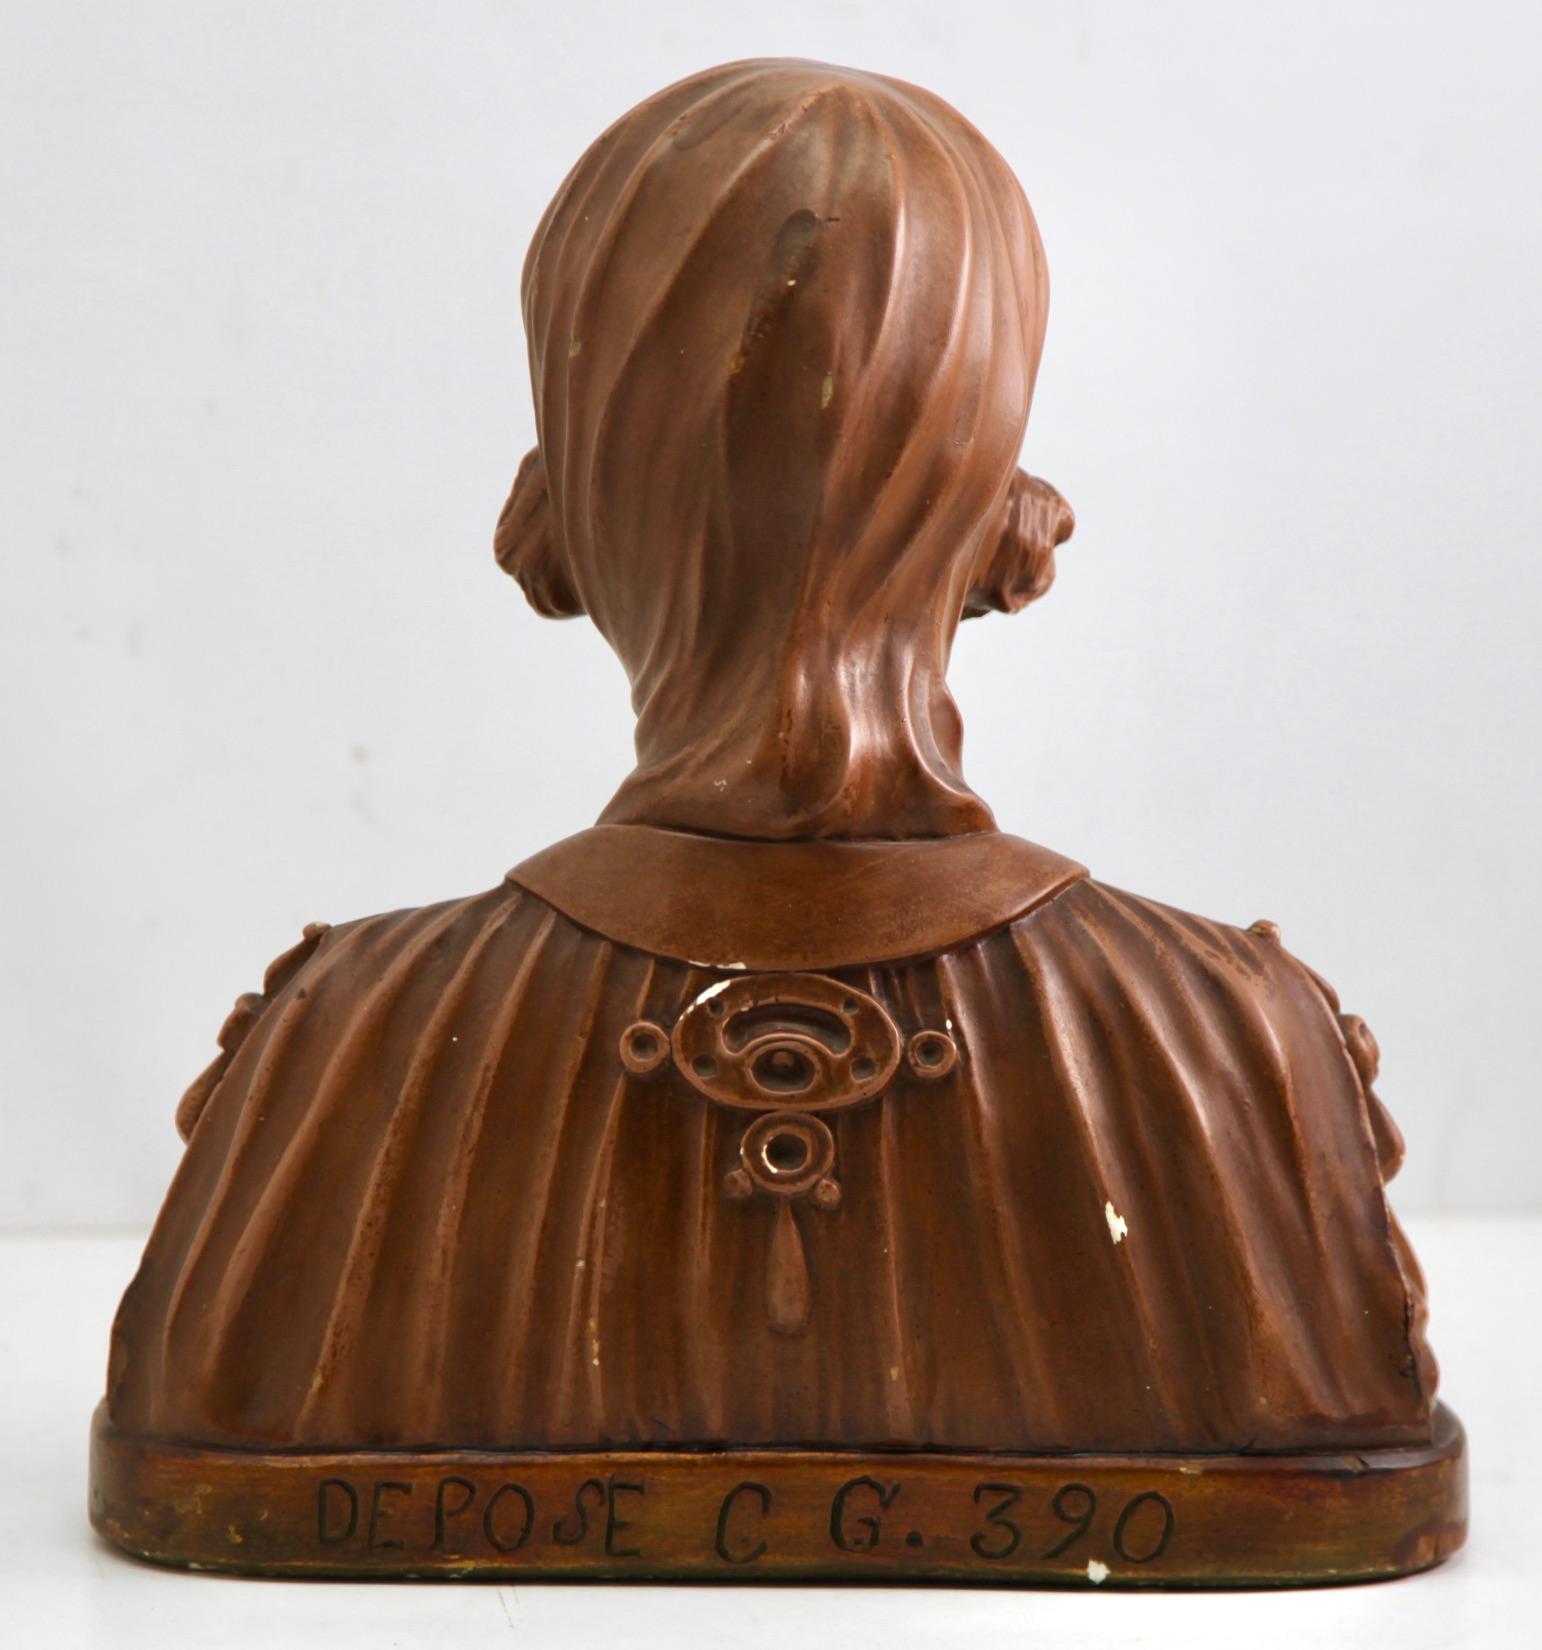 Hand-Crafted Art Nouveau 'Plaster' Detailed and Stylized Image of a Women's Buste Signed C.G. For Sale